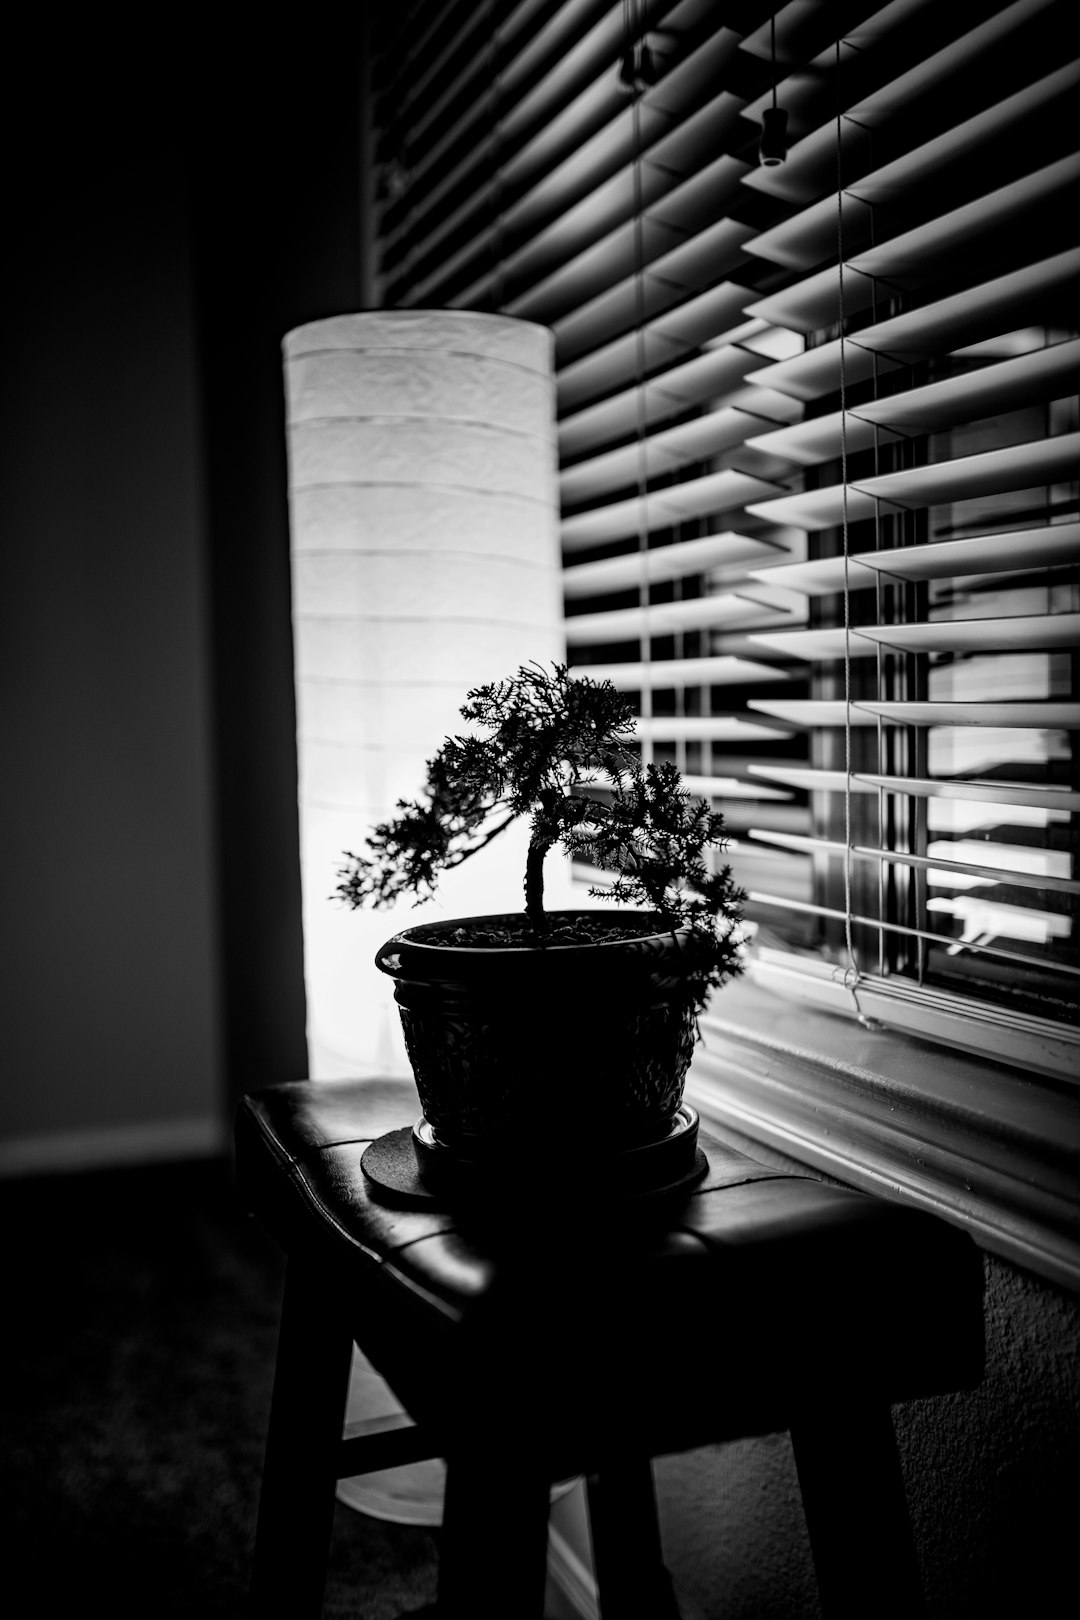 grayscale photography of plant in pot on table